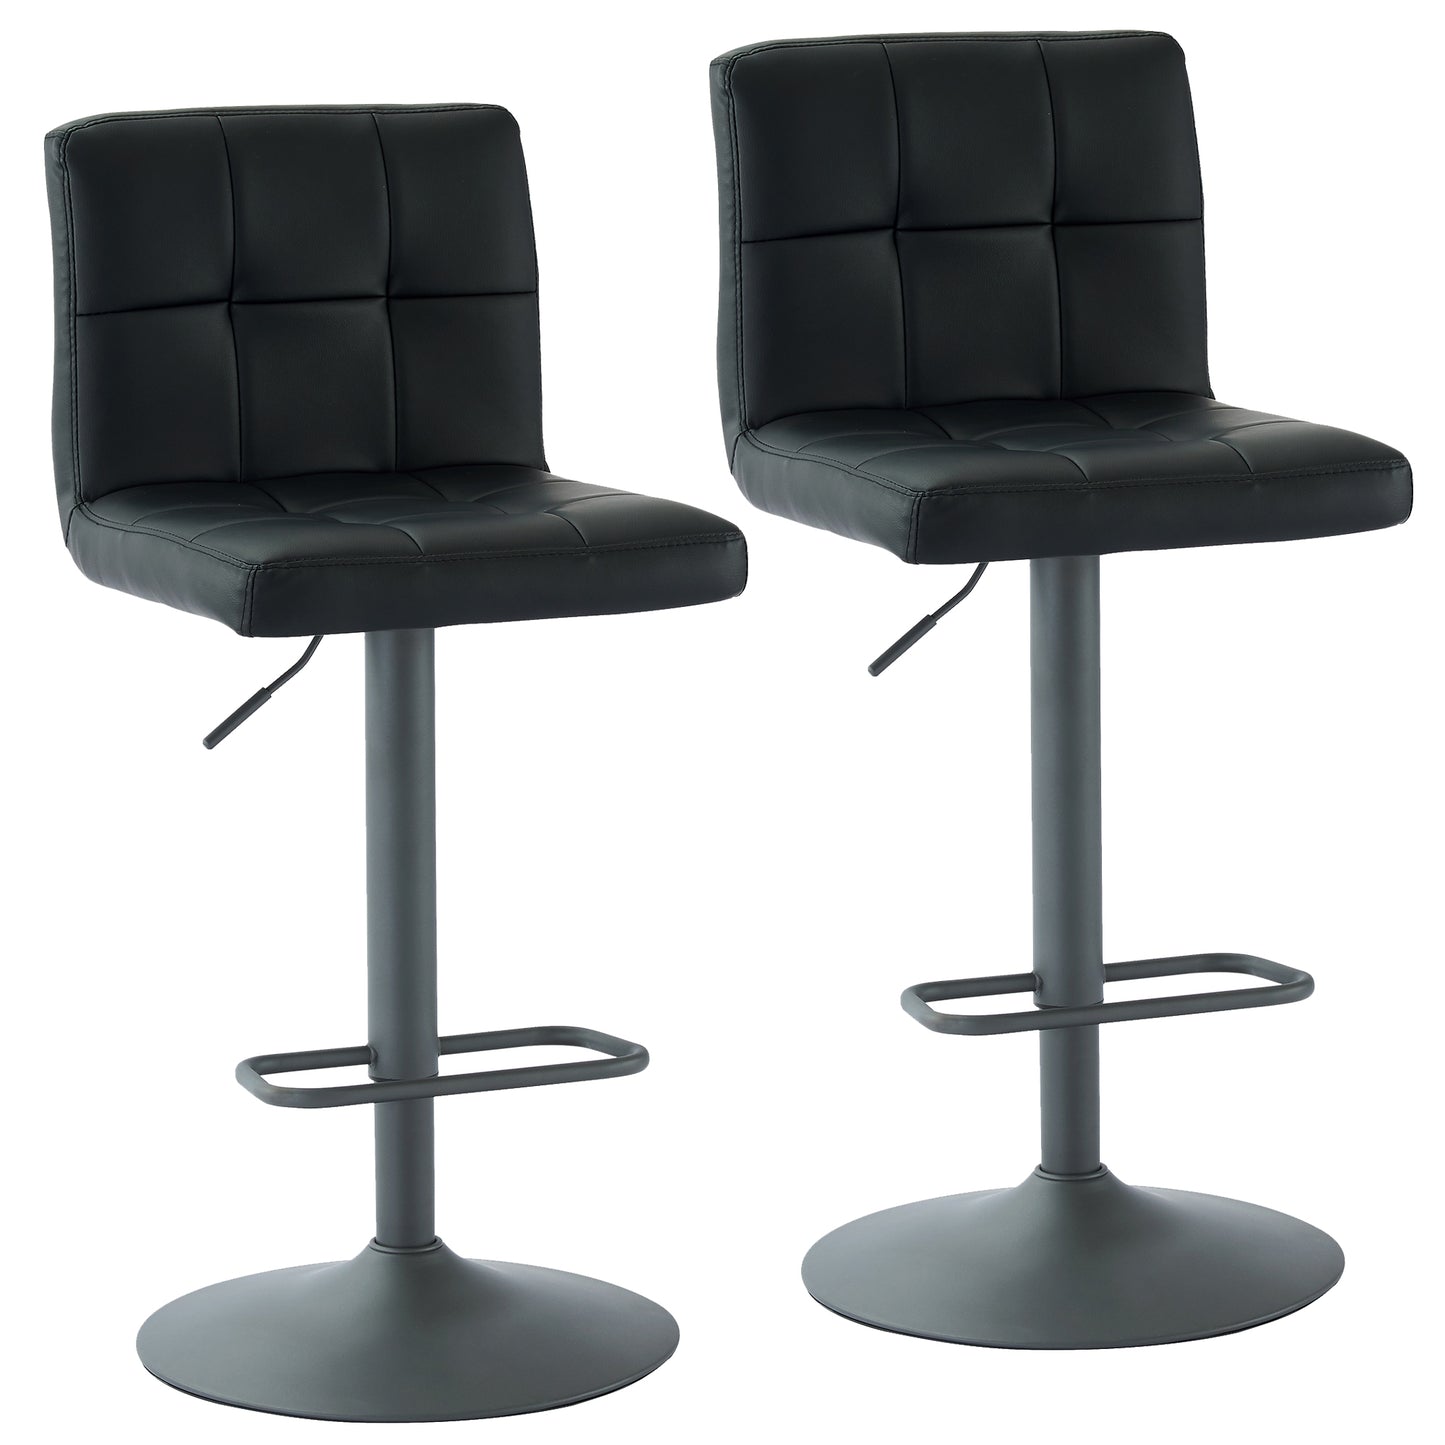 (FUSION BLACK- 2 PACK)- LEATHER BAR STOOLS